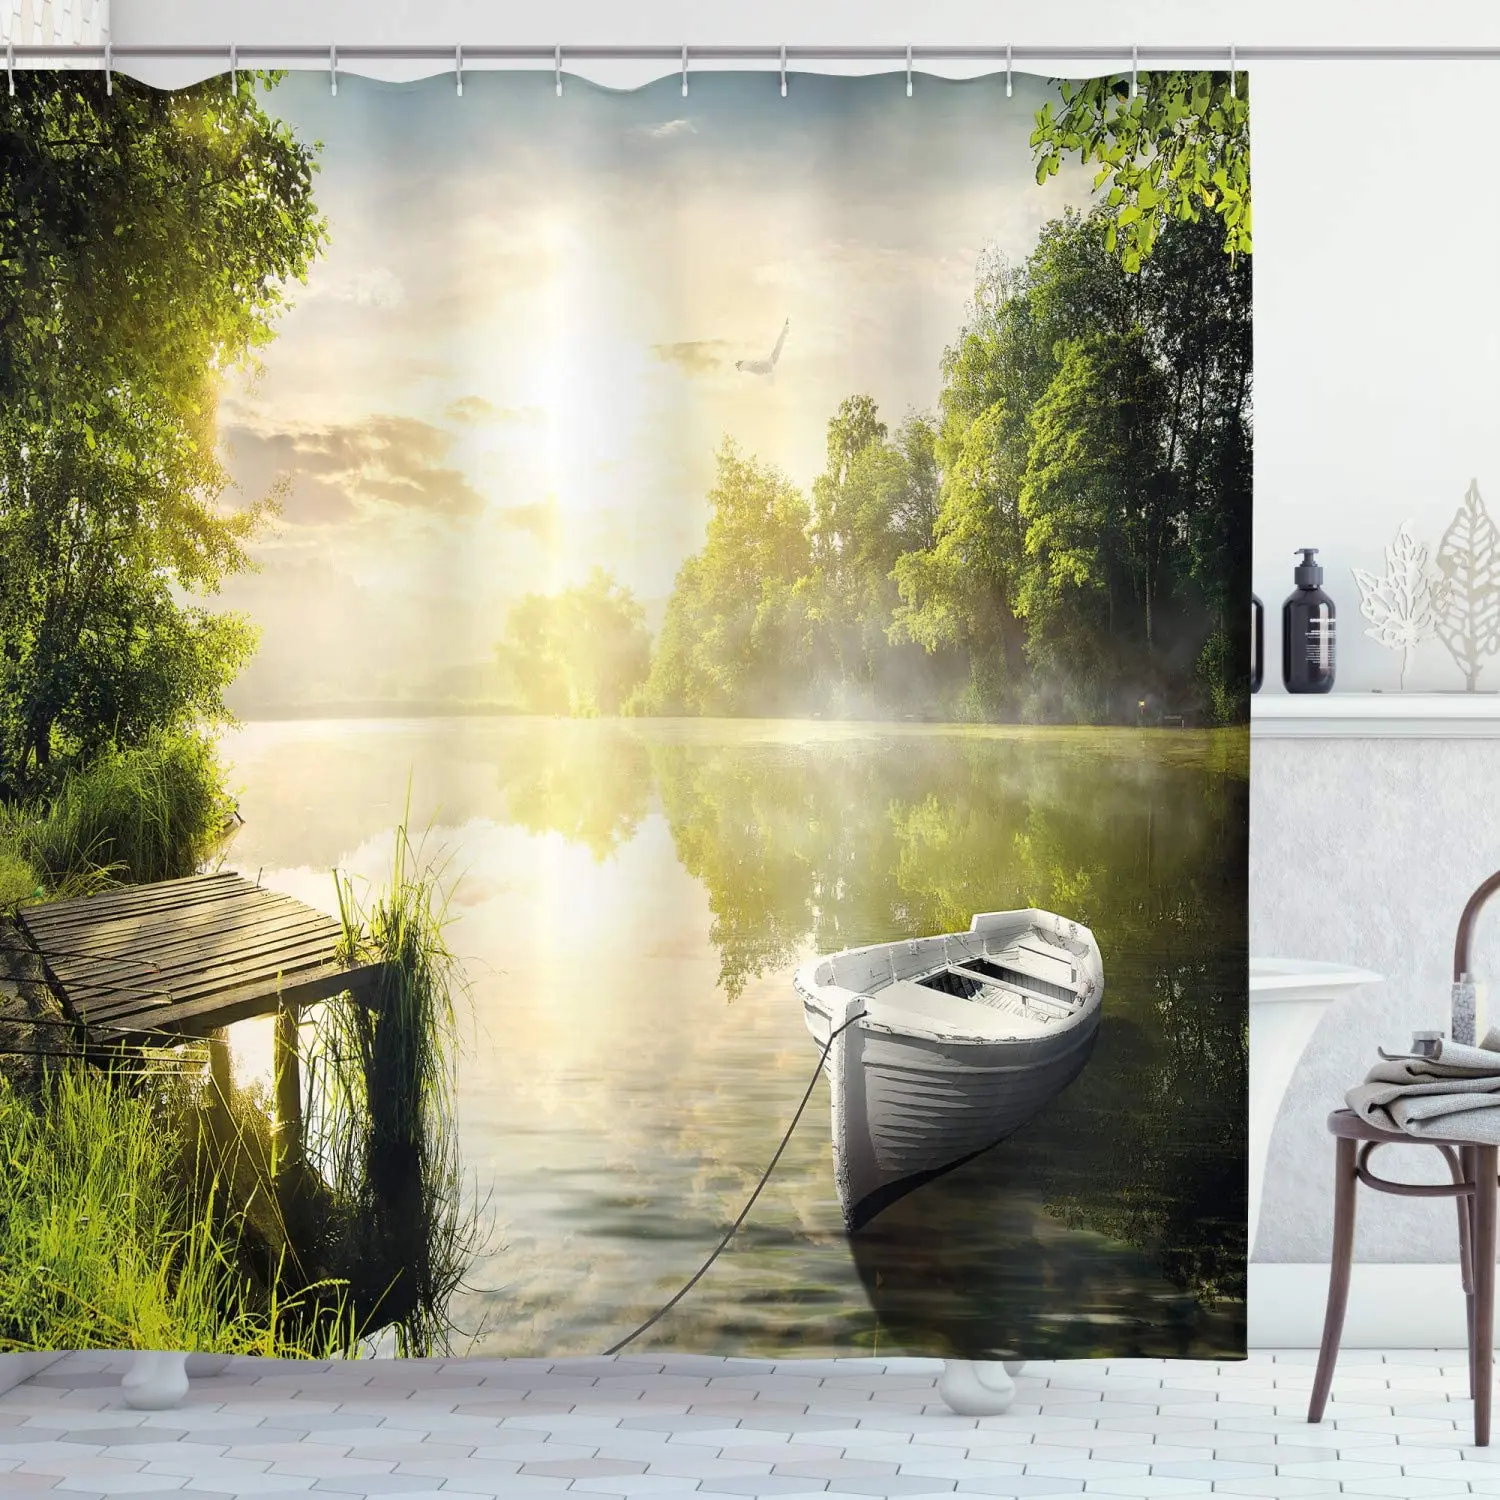 

Nature Shower Curtains Boat by The Foggy Lake Deck Dreamy Forest in The Morning Country Style Image Fabric Bathroom Decor Set